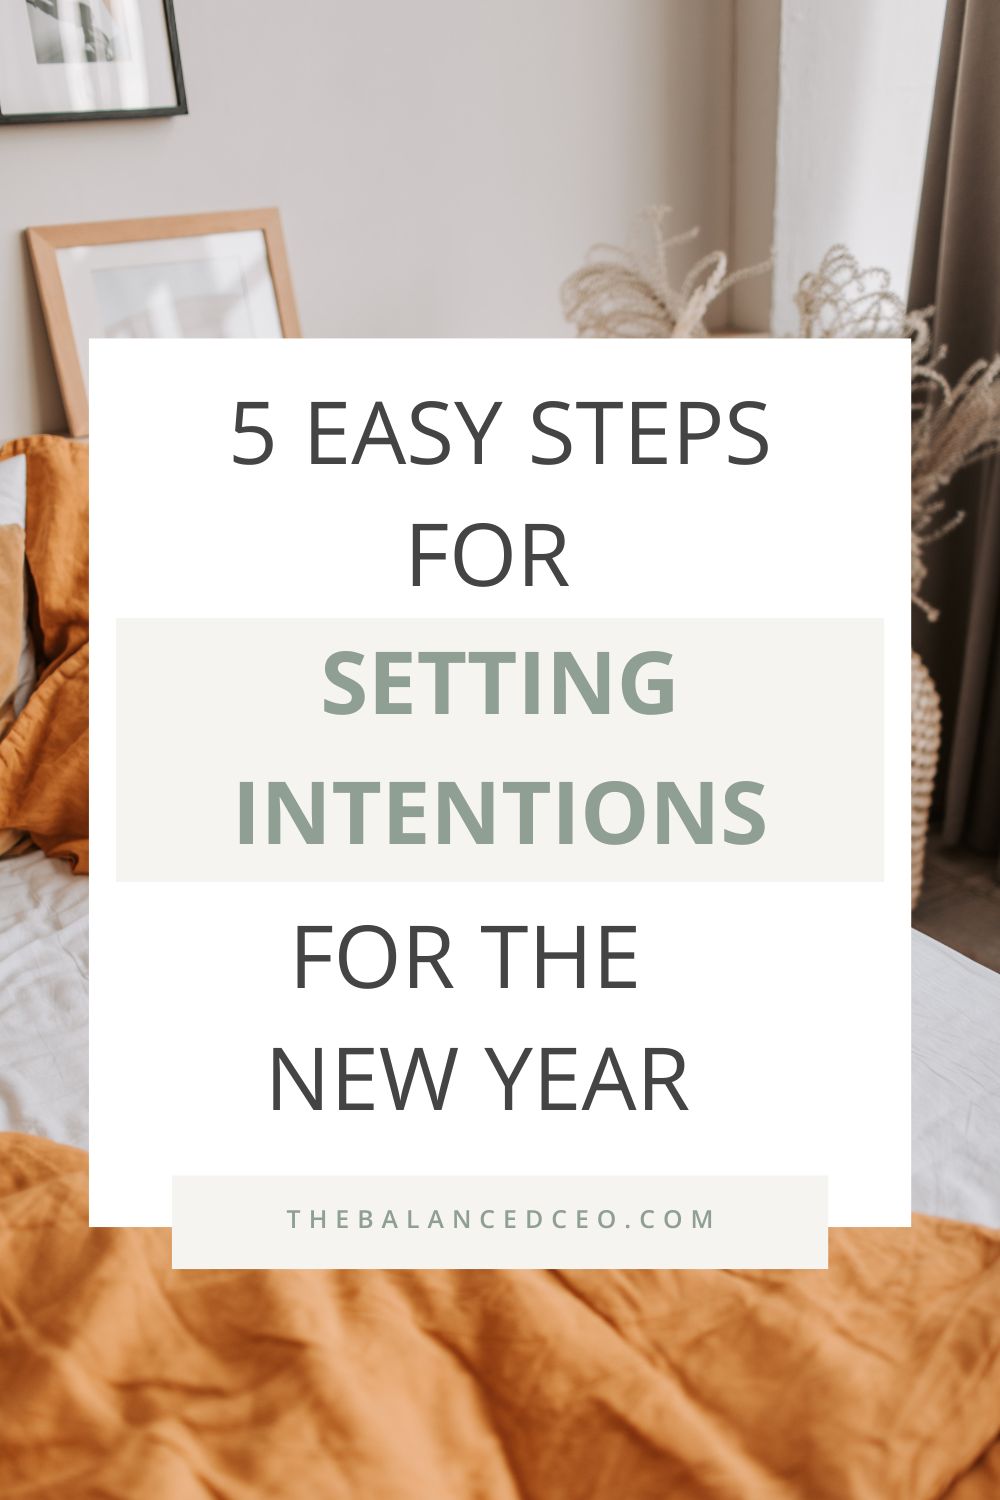 Setting Intentions for the New Year: 5 Easy Steps